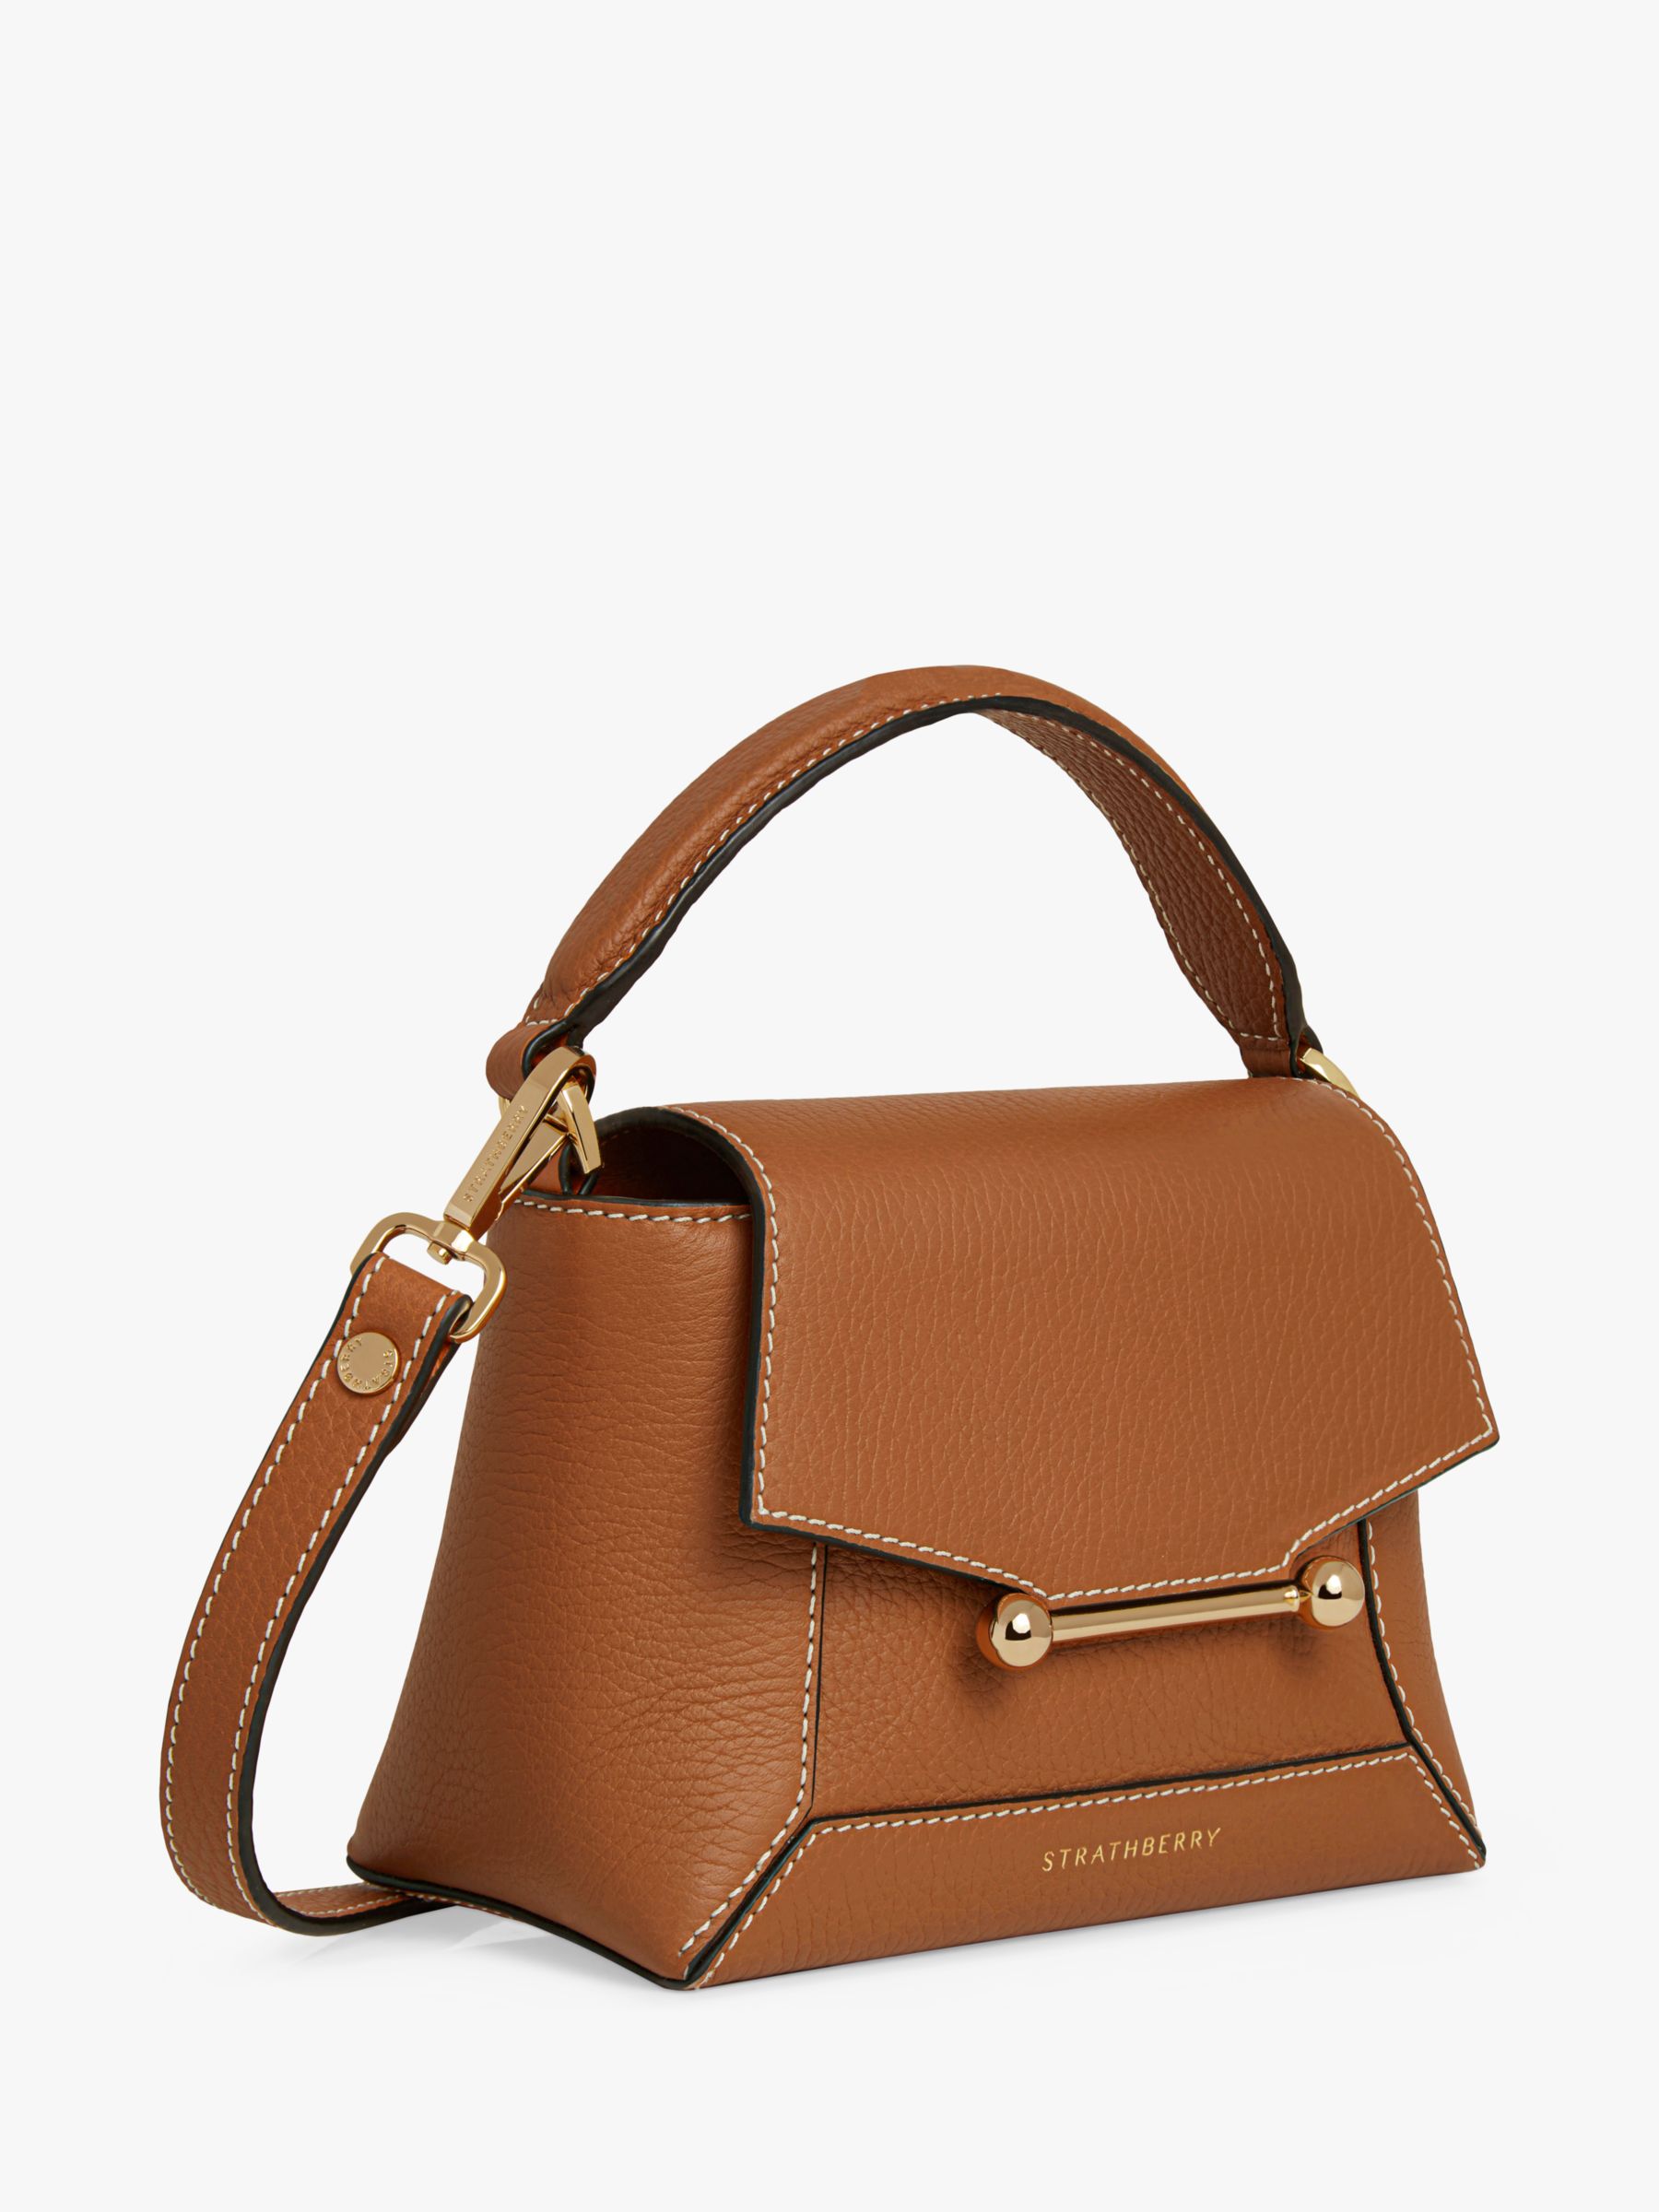 Buy Strathberry Mosaic Nano Leather Cross Body Bag, Tan Online at johnlewis.com